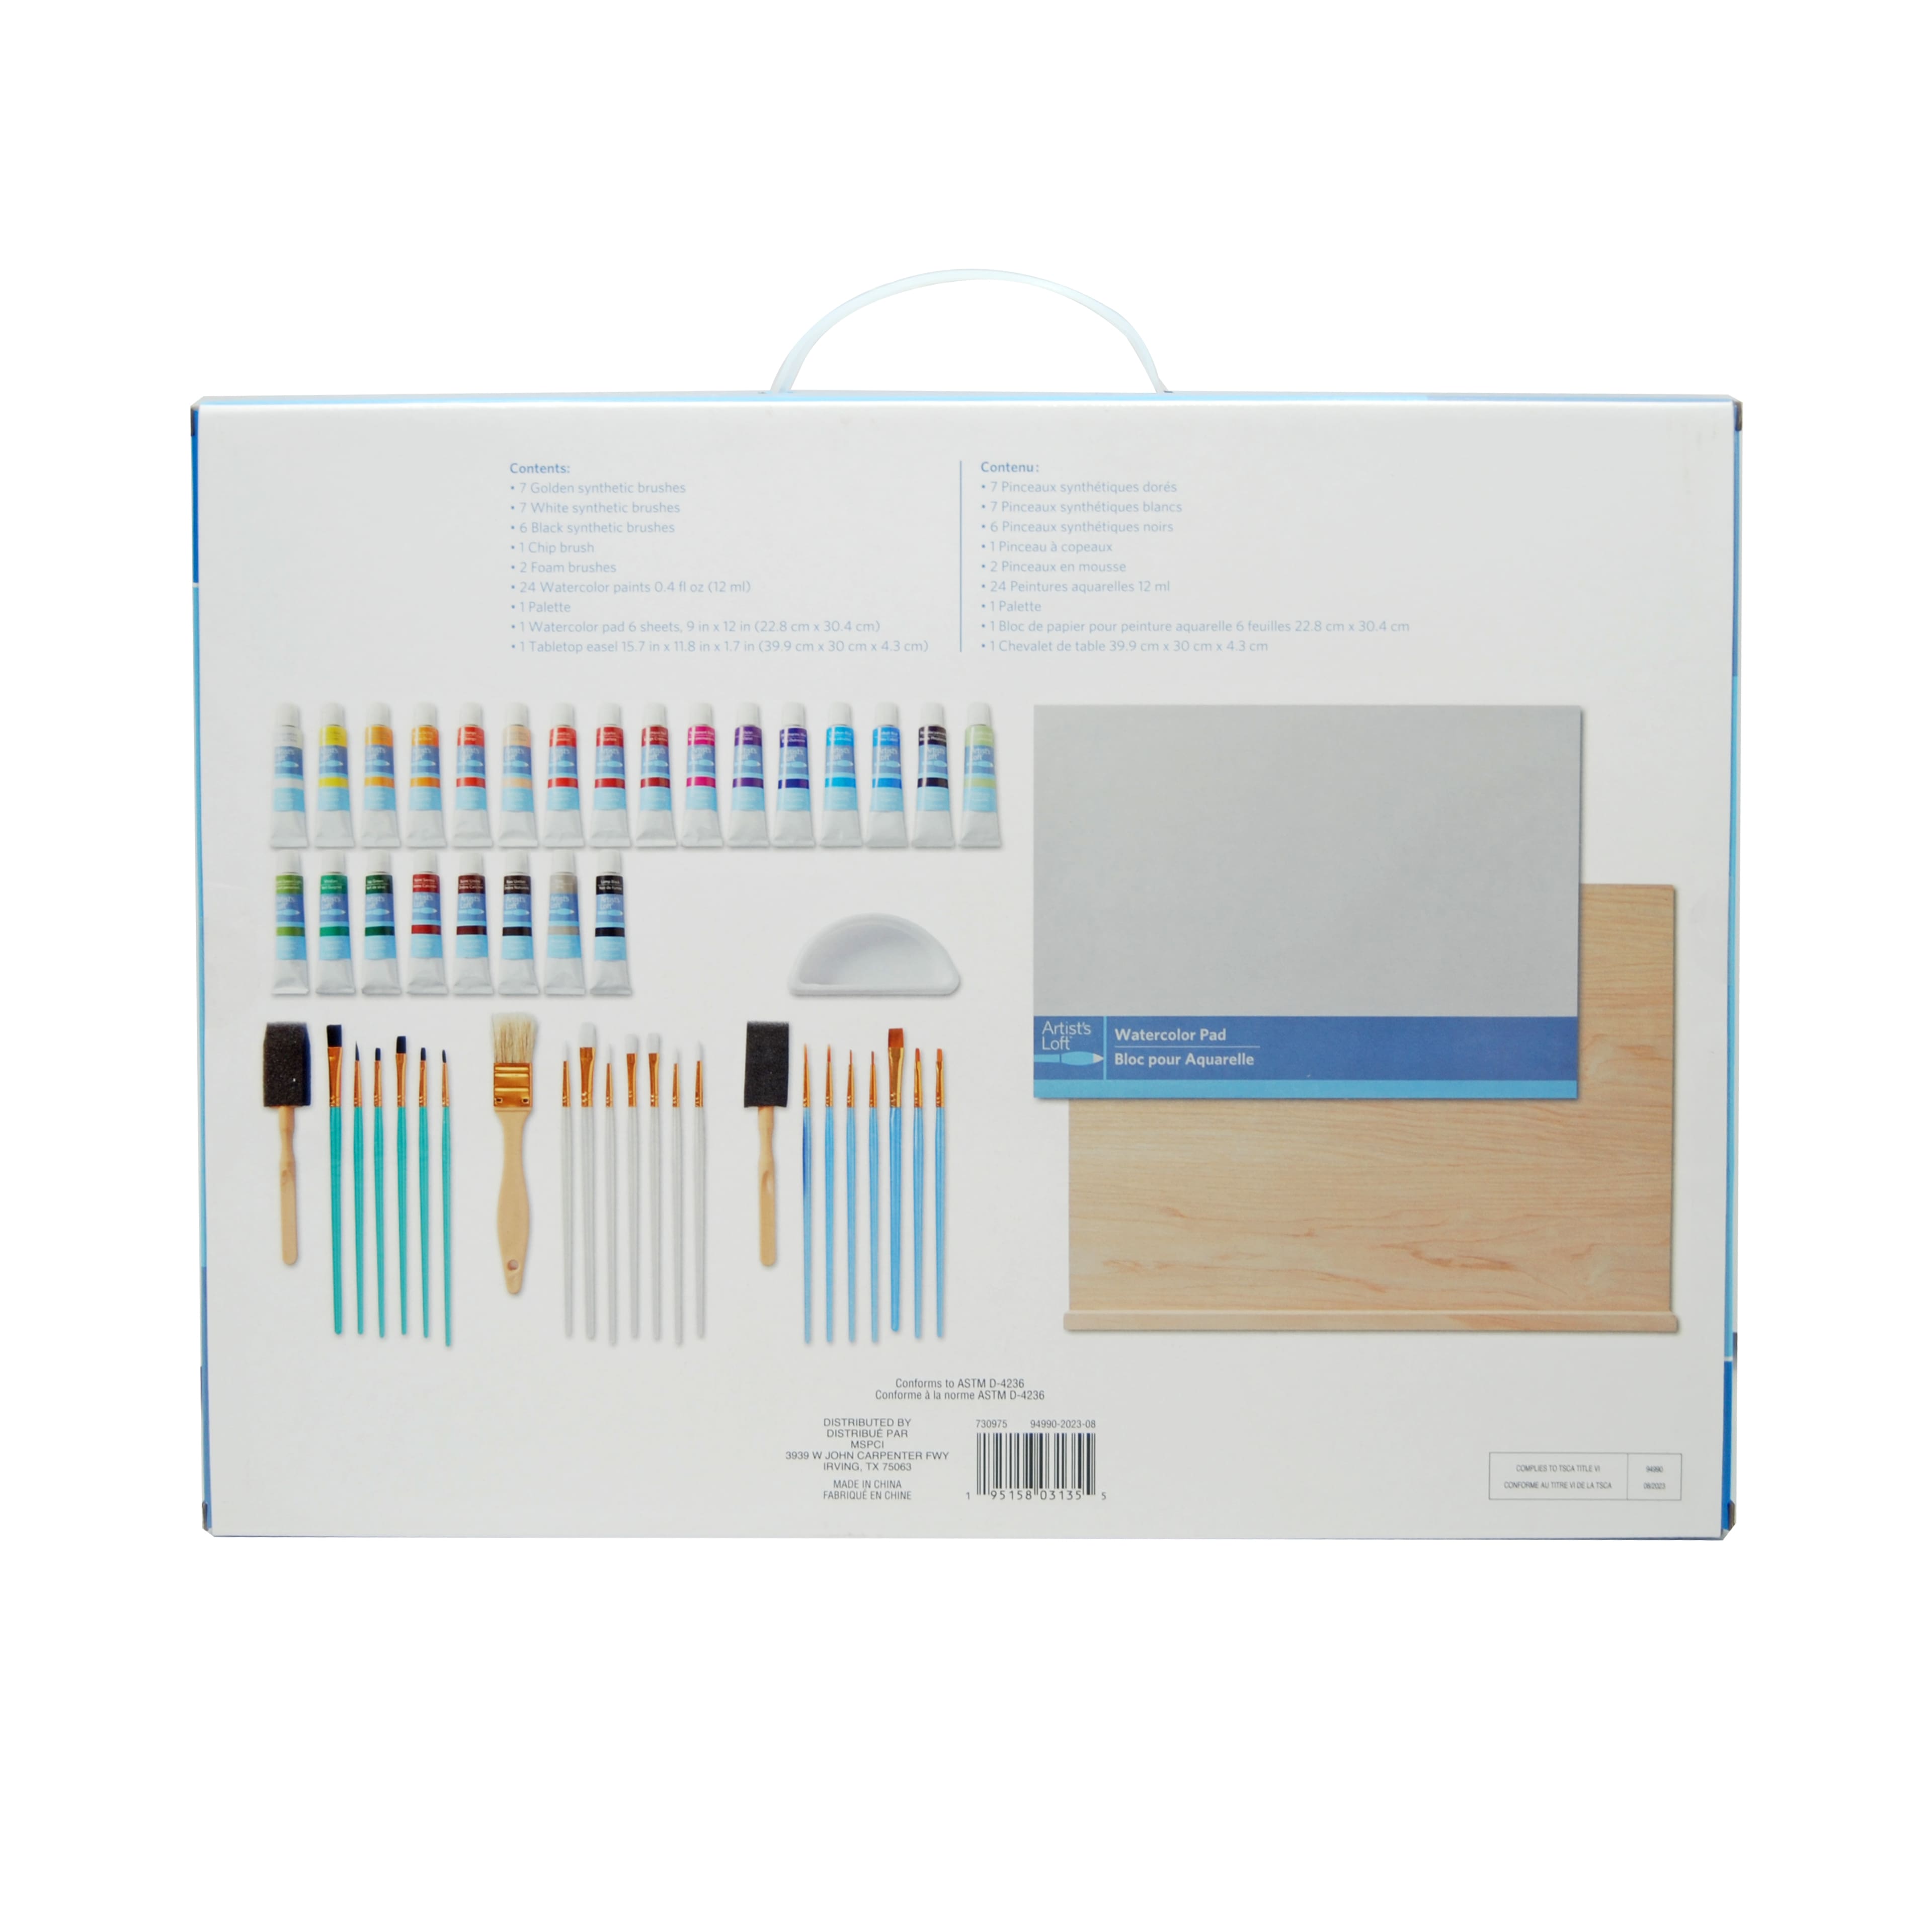 50-Piece Watercolor Paint Set with Easel by Artist's Loft™